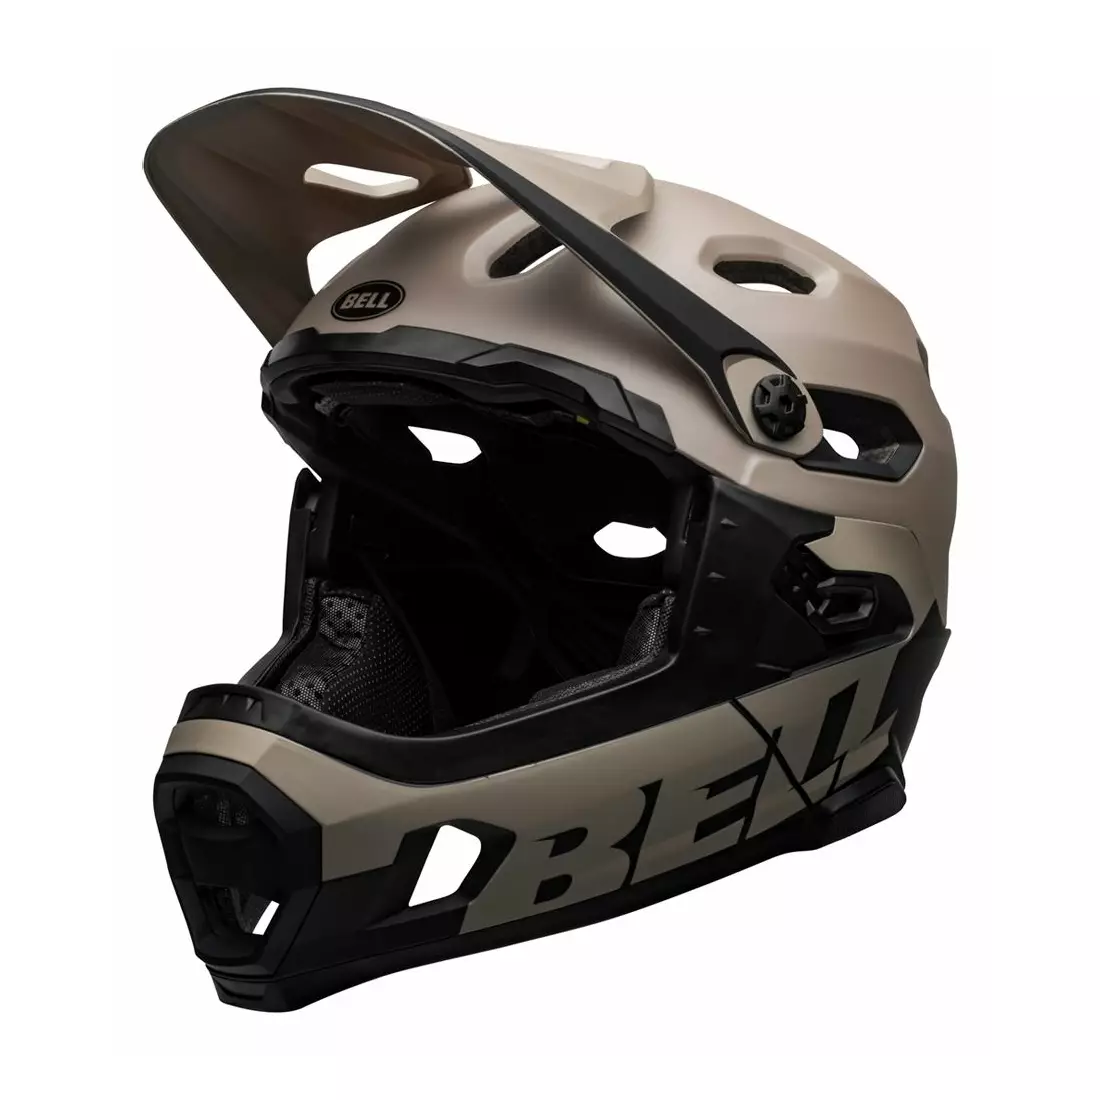 BELL SUPER DH MIPS SPHERICAL kask rowerowy full face, matte gloss sand black